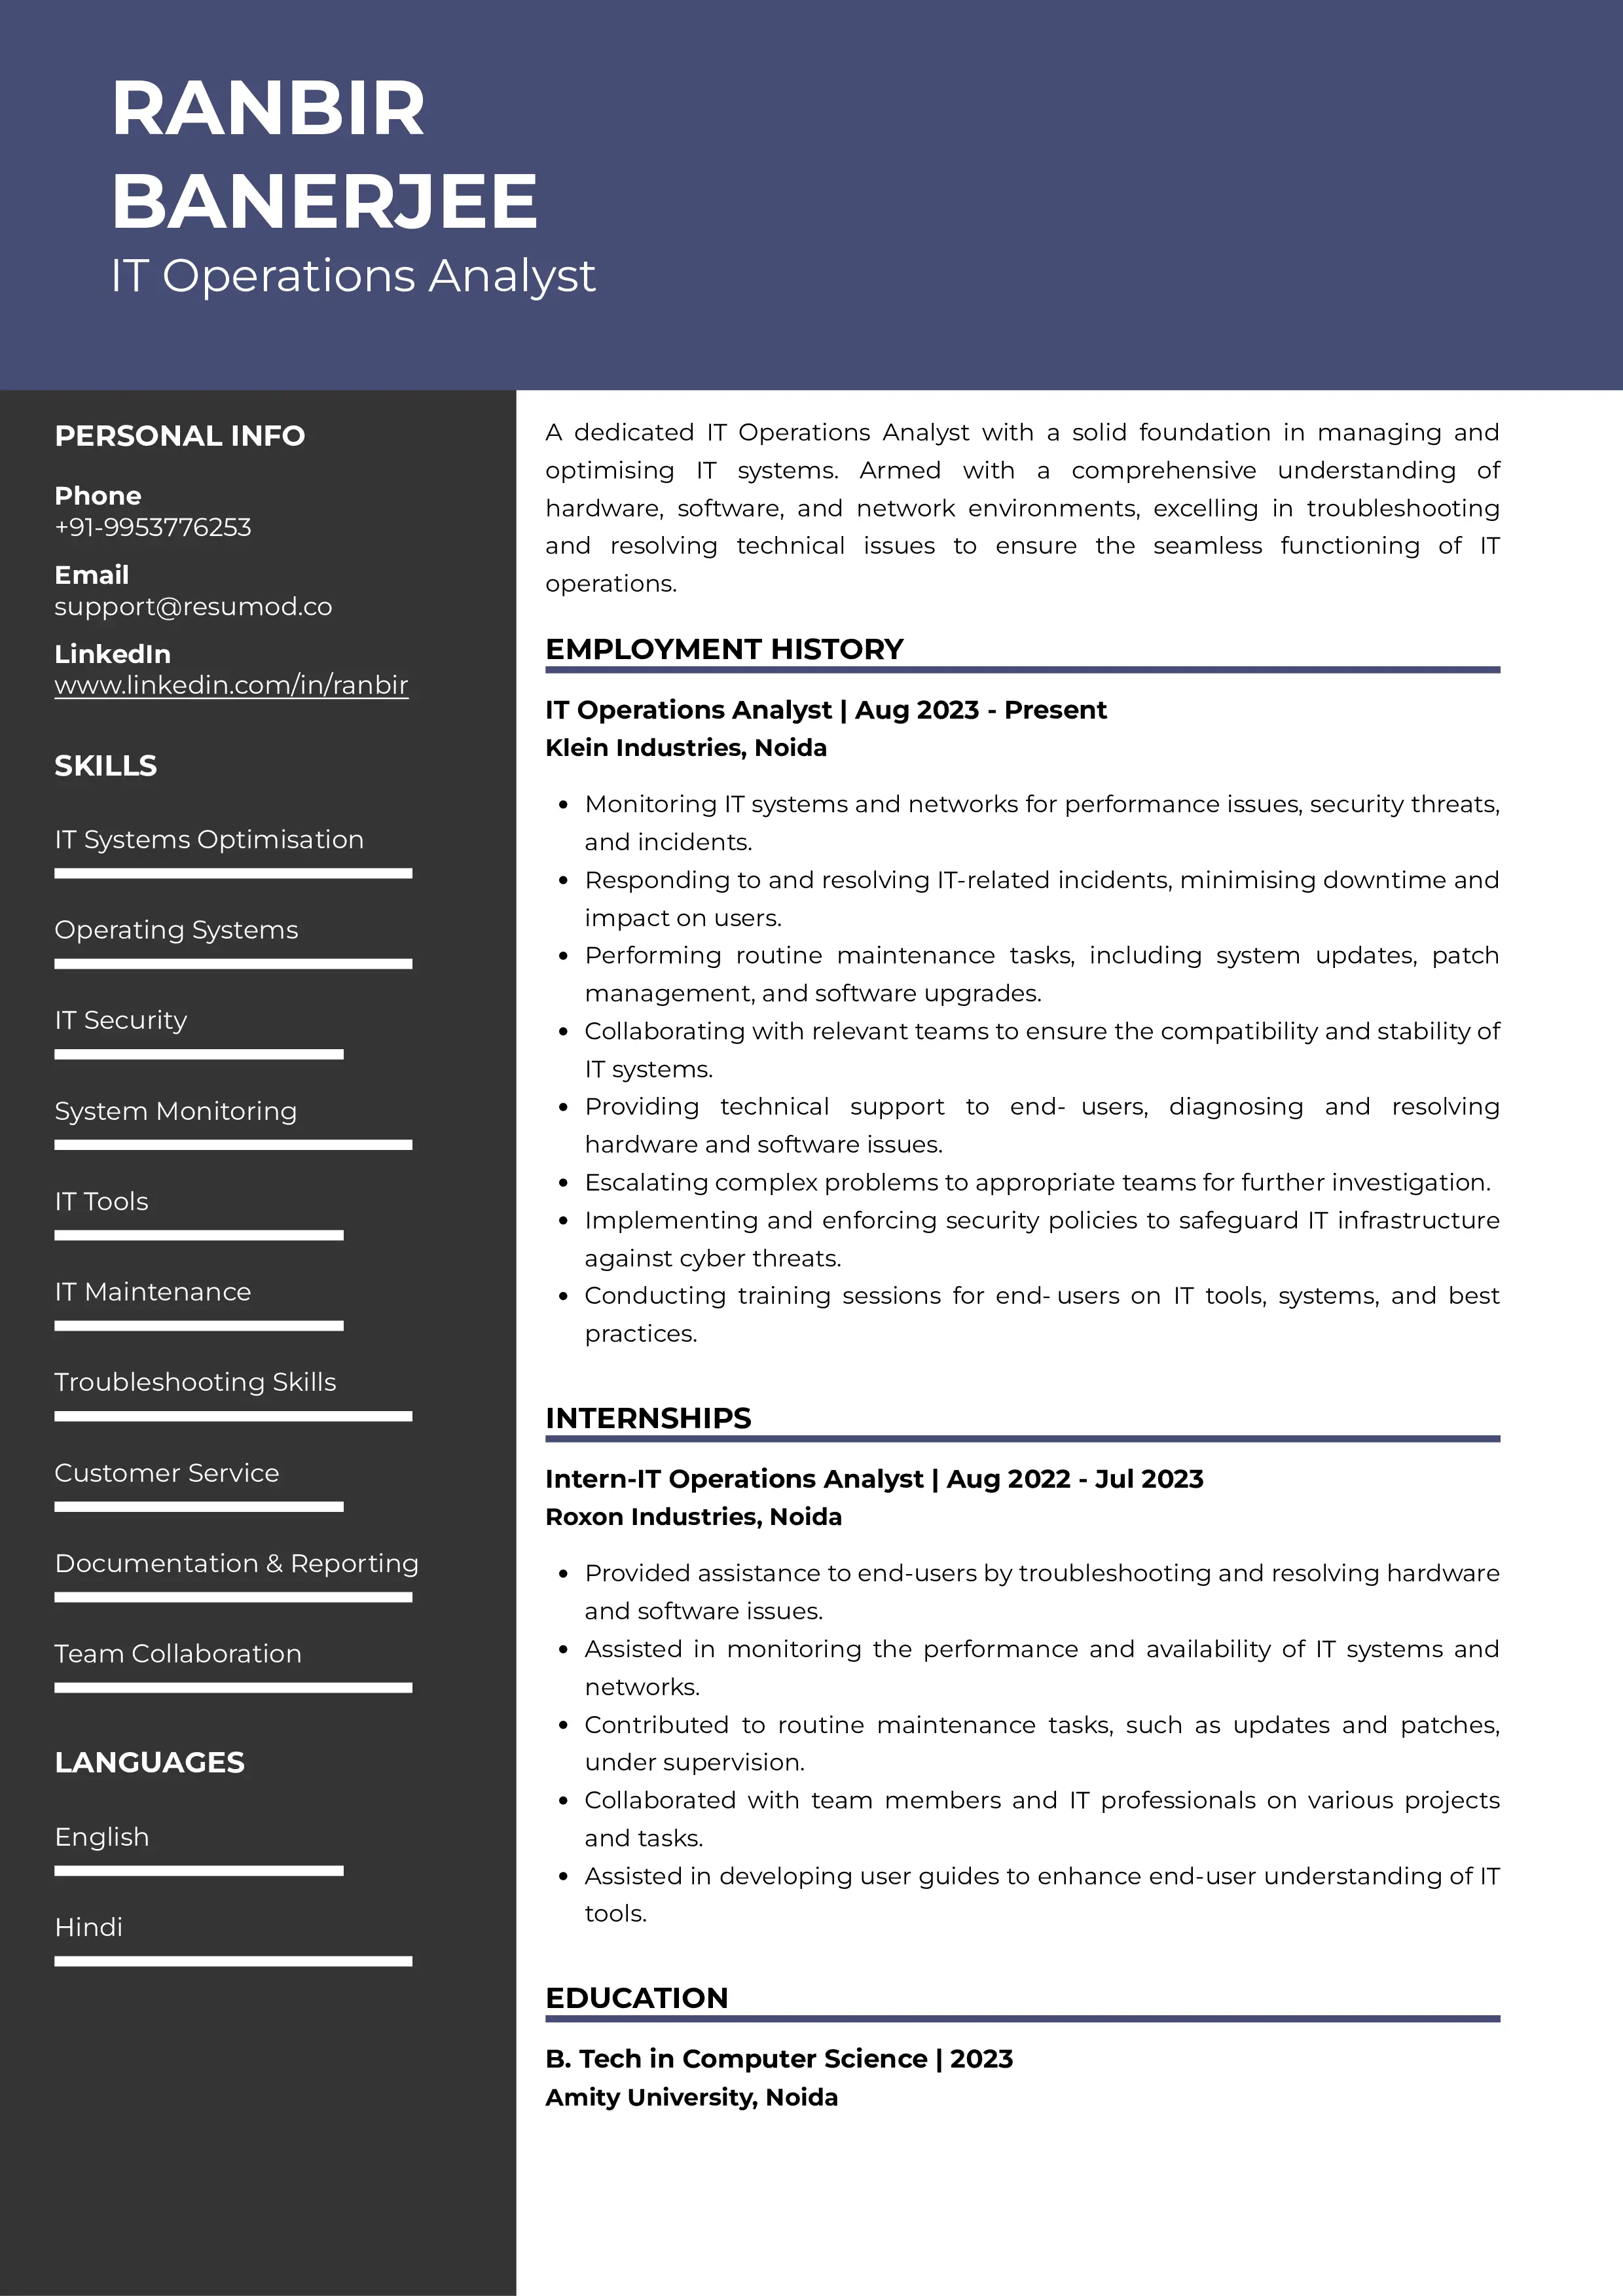 Sample Resume of IT Operations Analyst | Free Resume Templates & Samples on Resumod.co